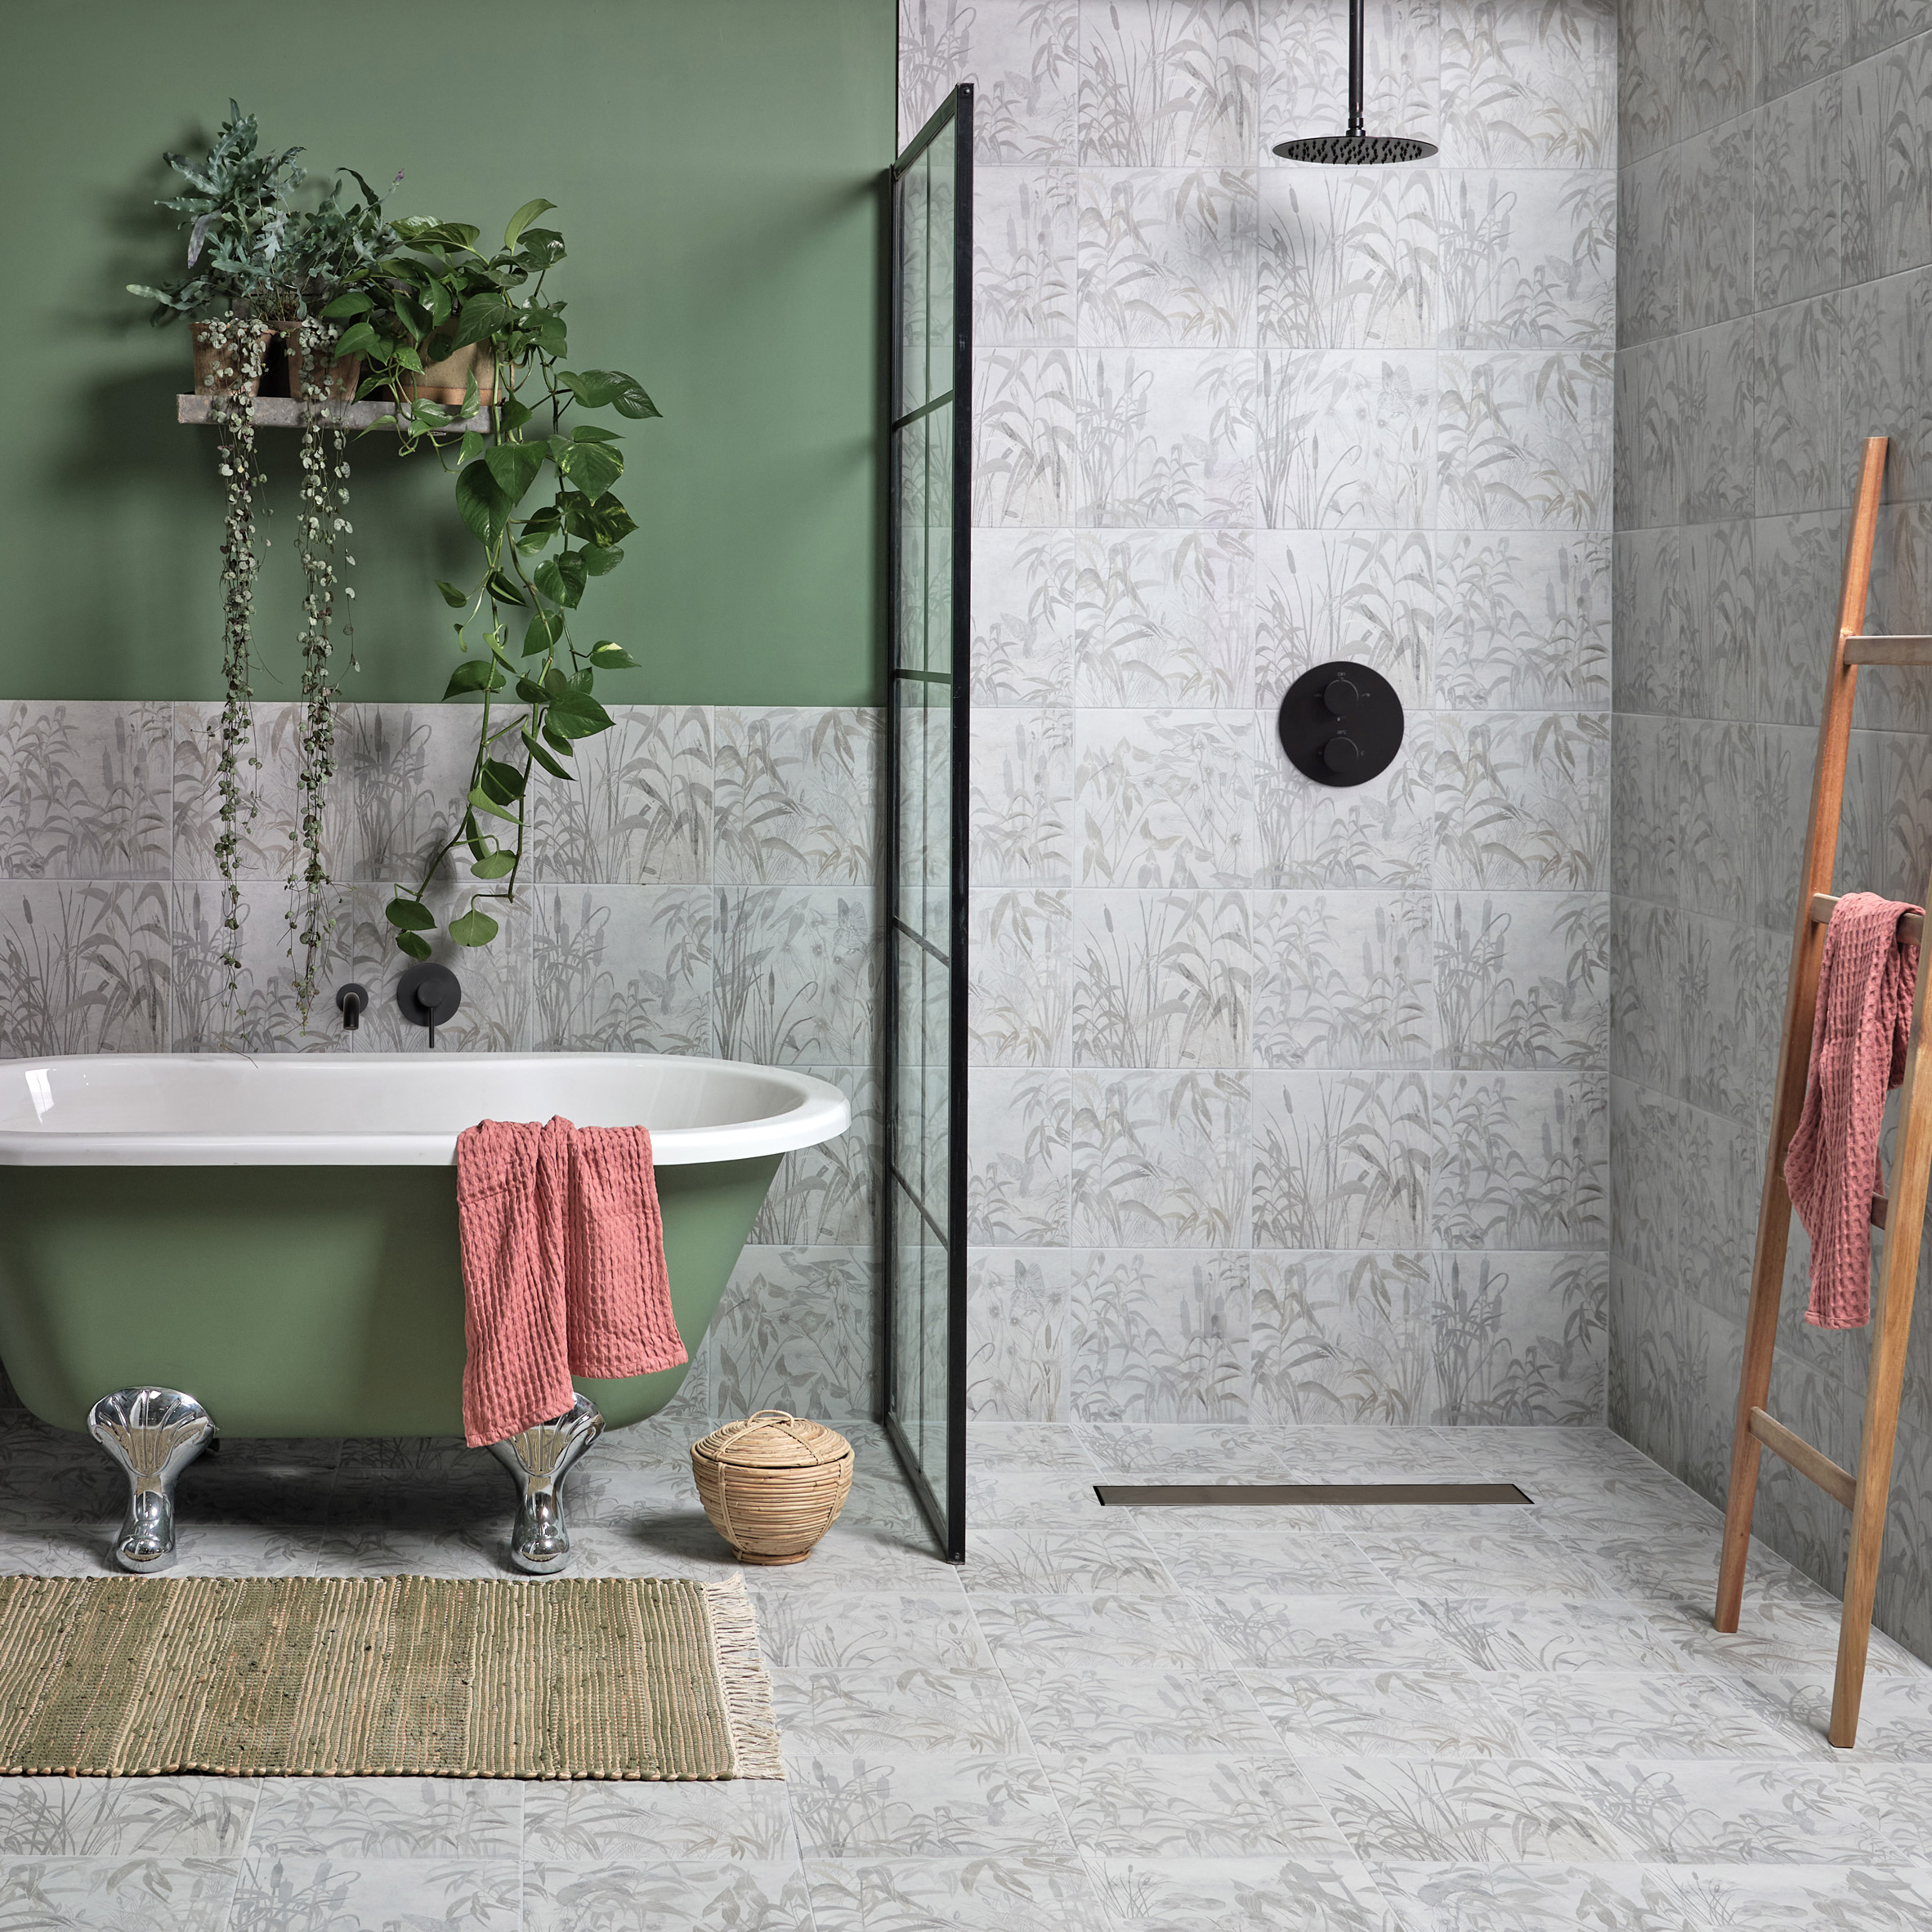 Tiles by Ca' Pietra featuring a plant-like design